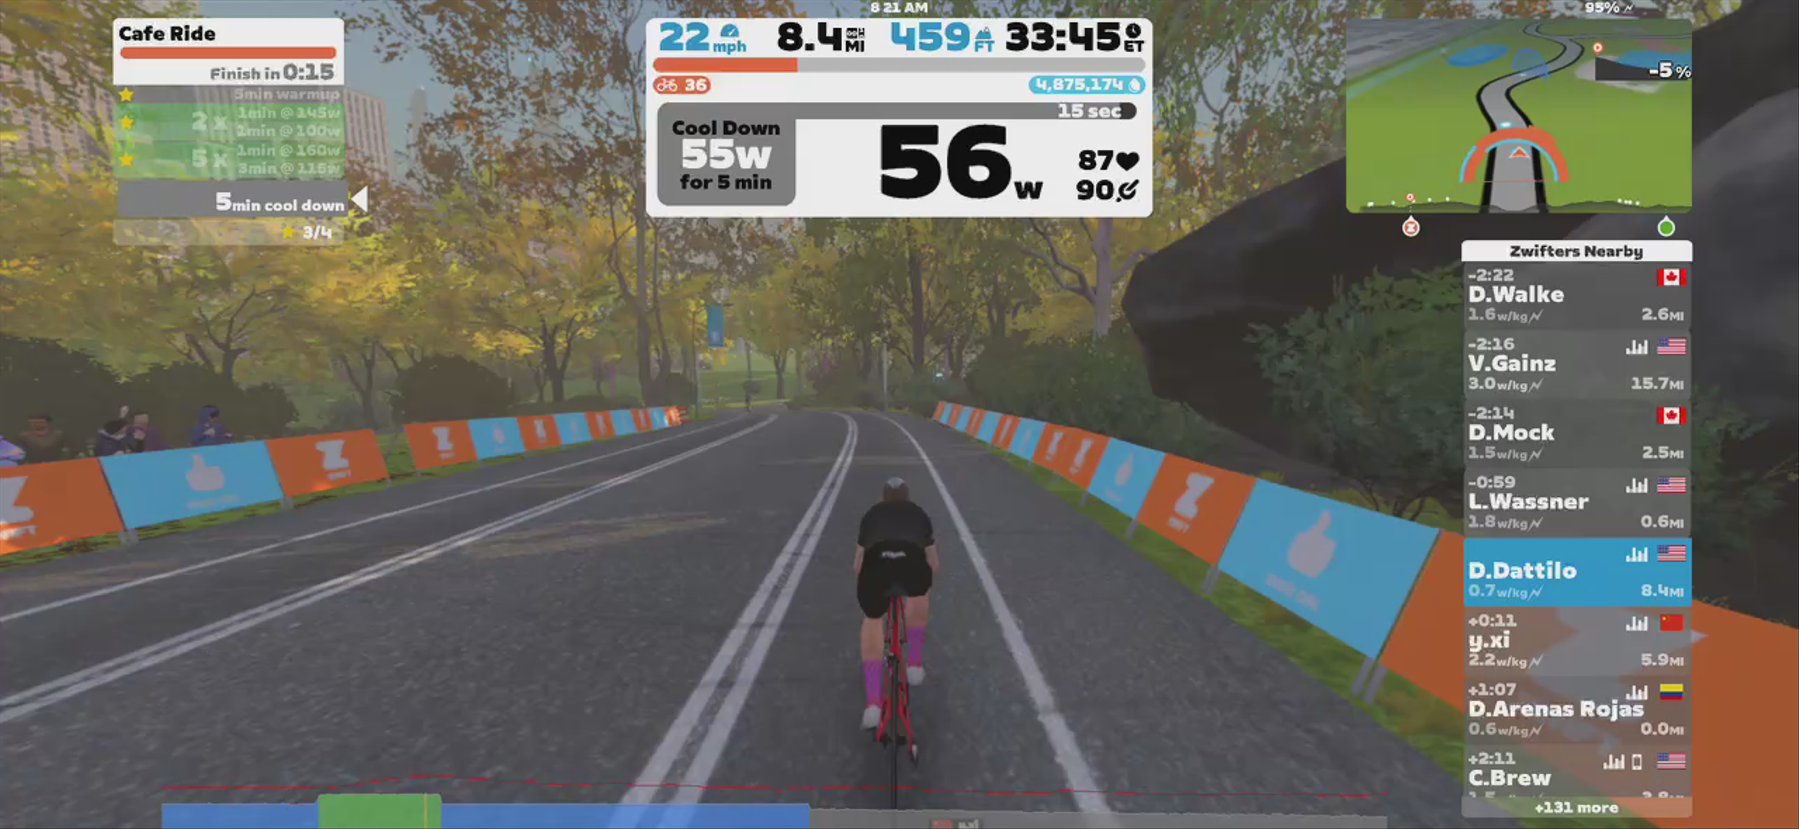 Zwift - INEOS Grenadiers Virtual Training Camp | The Cafe Ride in New York